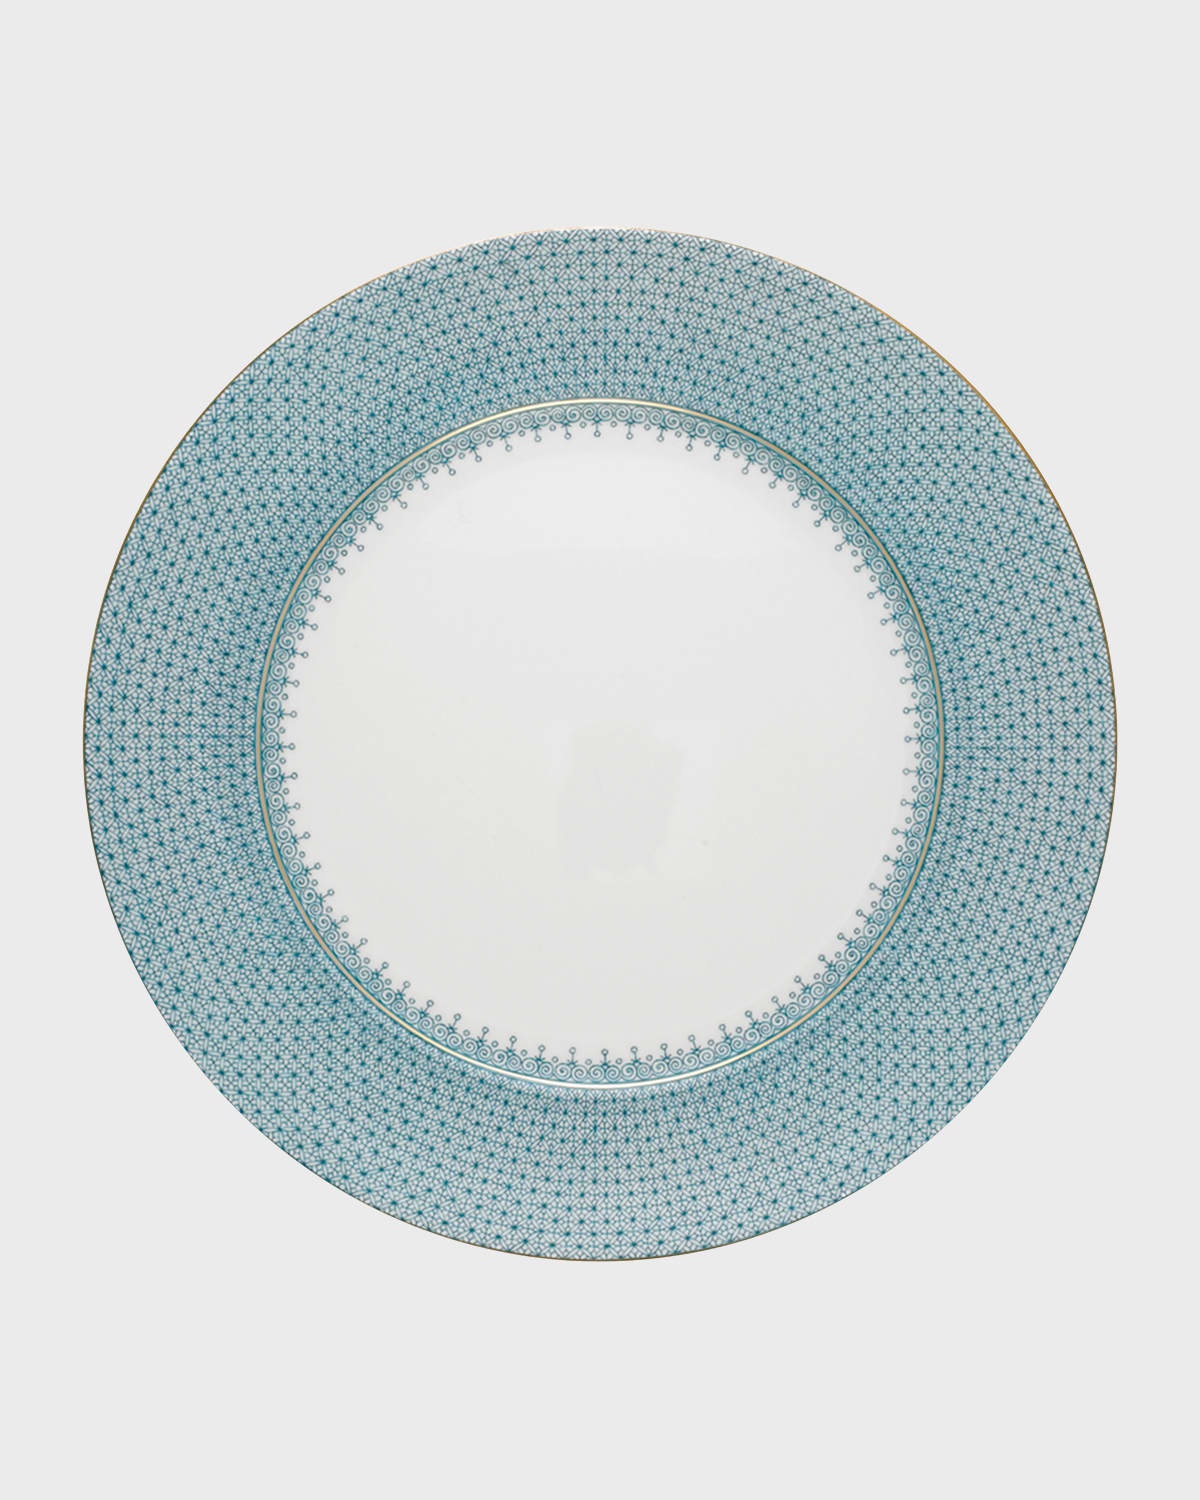 MOTTAHEDEH TURQUOISE LACE SERVICE PLATE